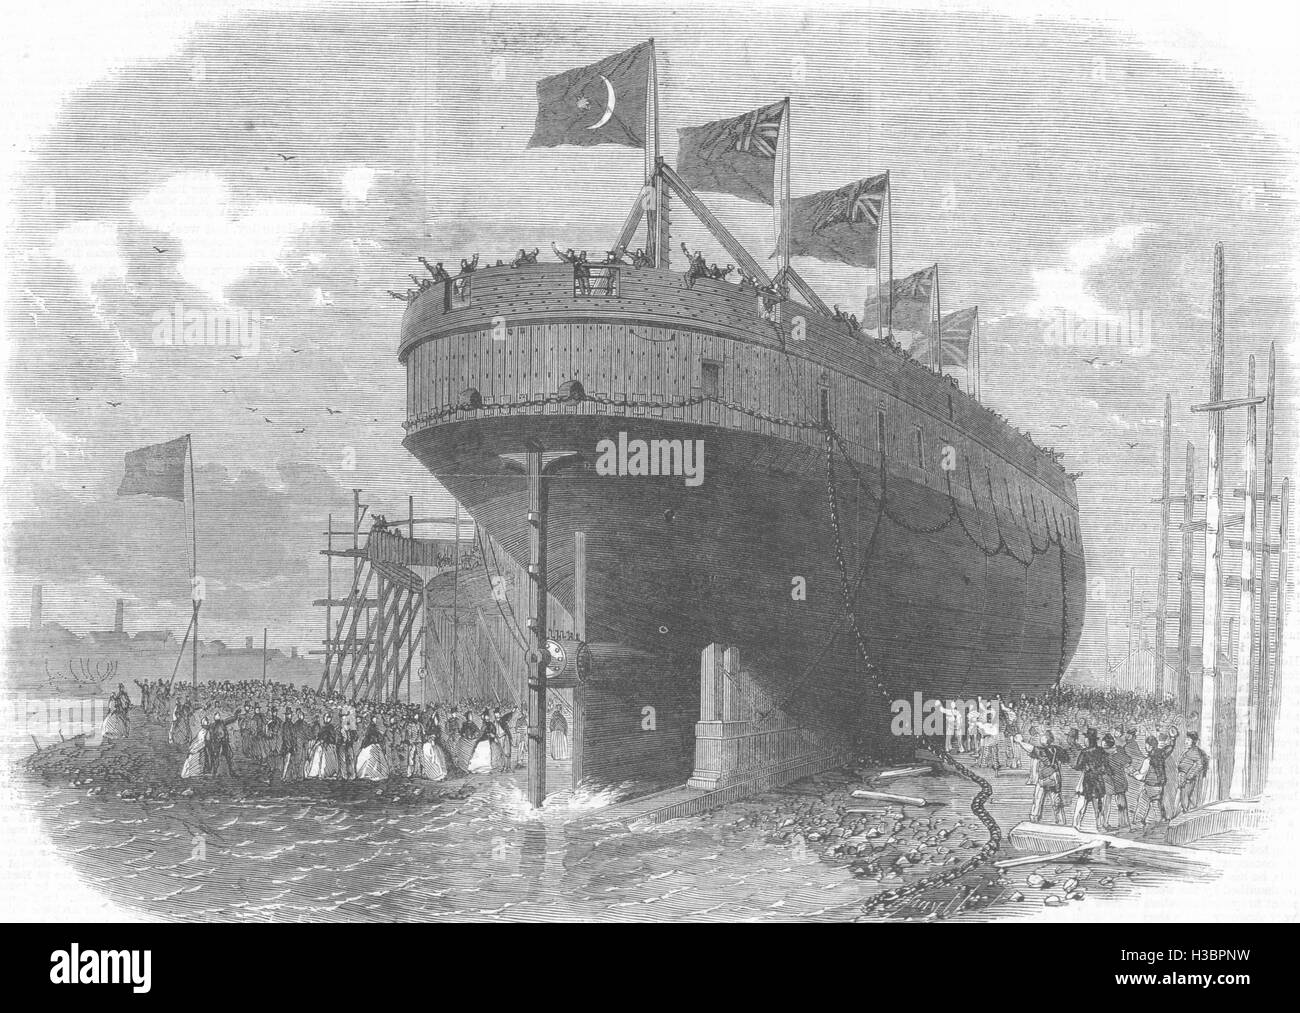 GLASGOW Launch Osman Ghazy, ironclad steam-ram, built for Turkish Govt at  1864. The Illustrated London News Stock Photo - Alamy